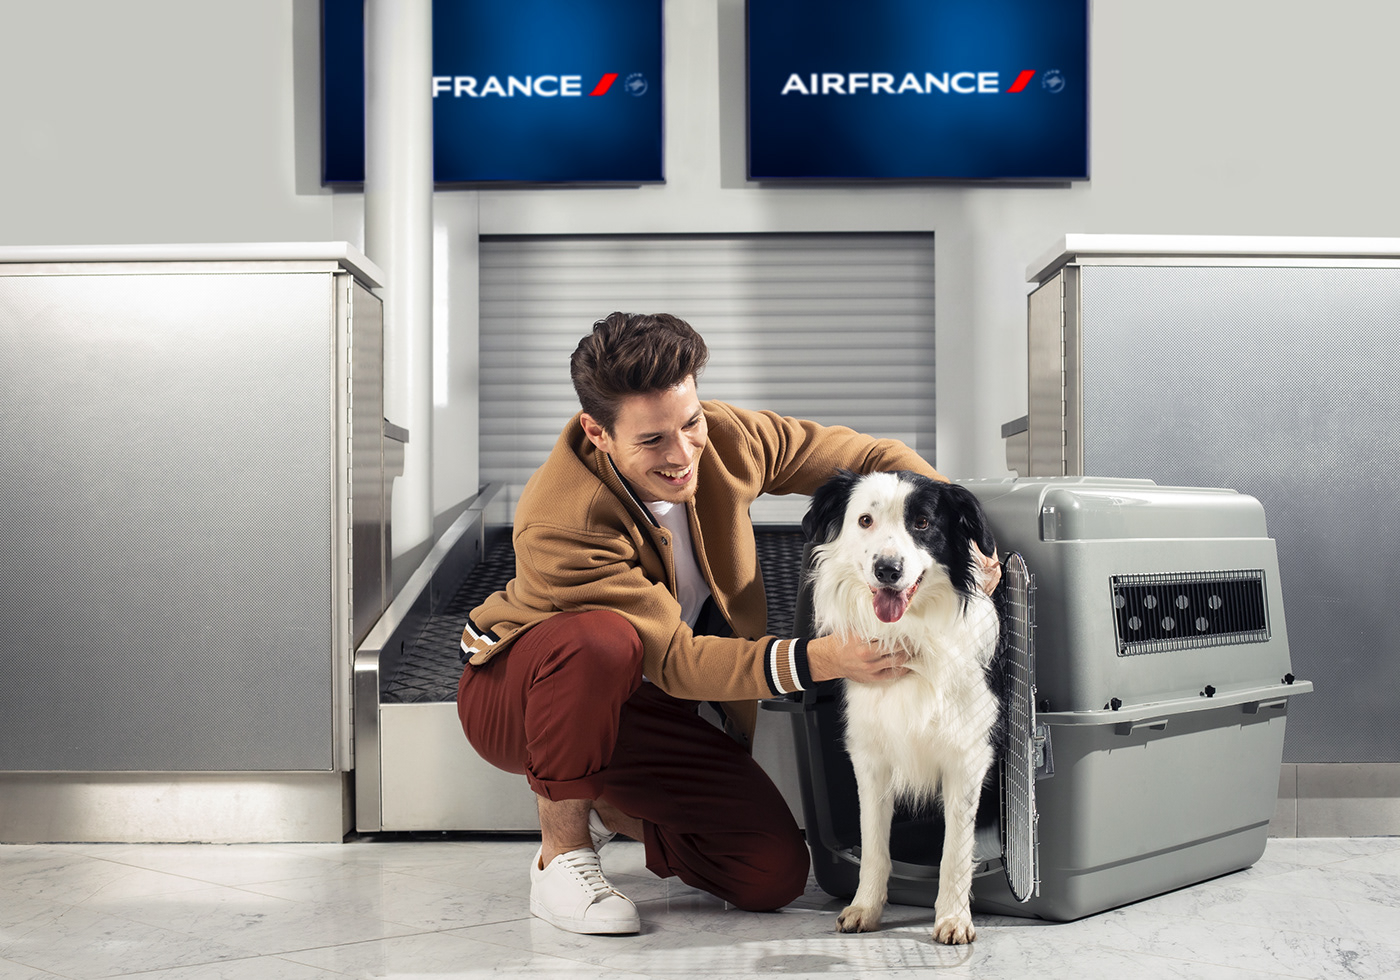 Air France bagage model Photography  photoshoot Travel voyage